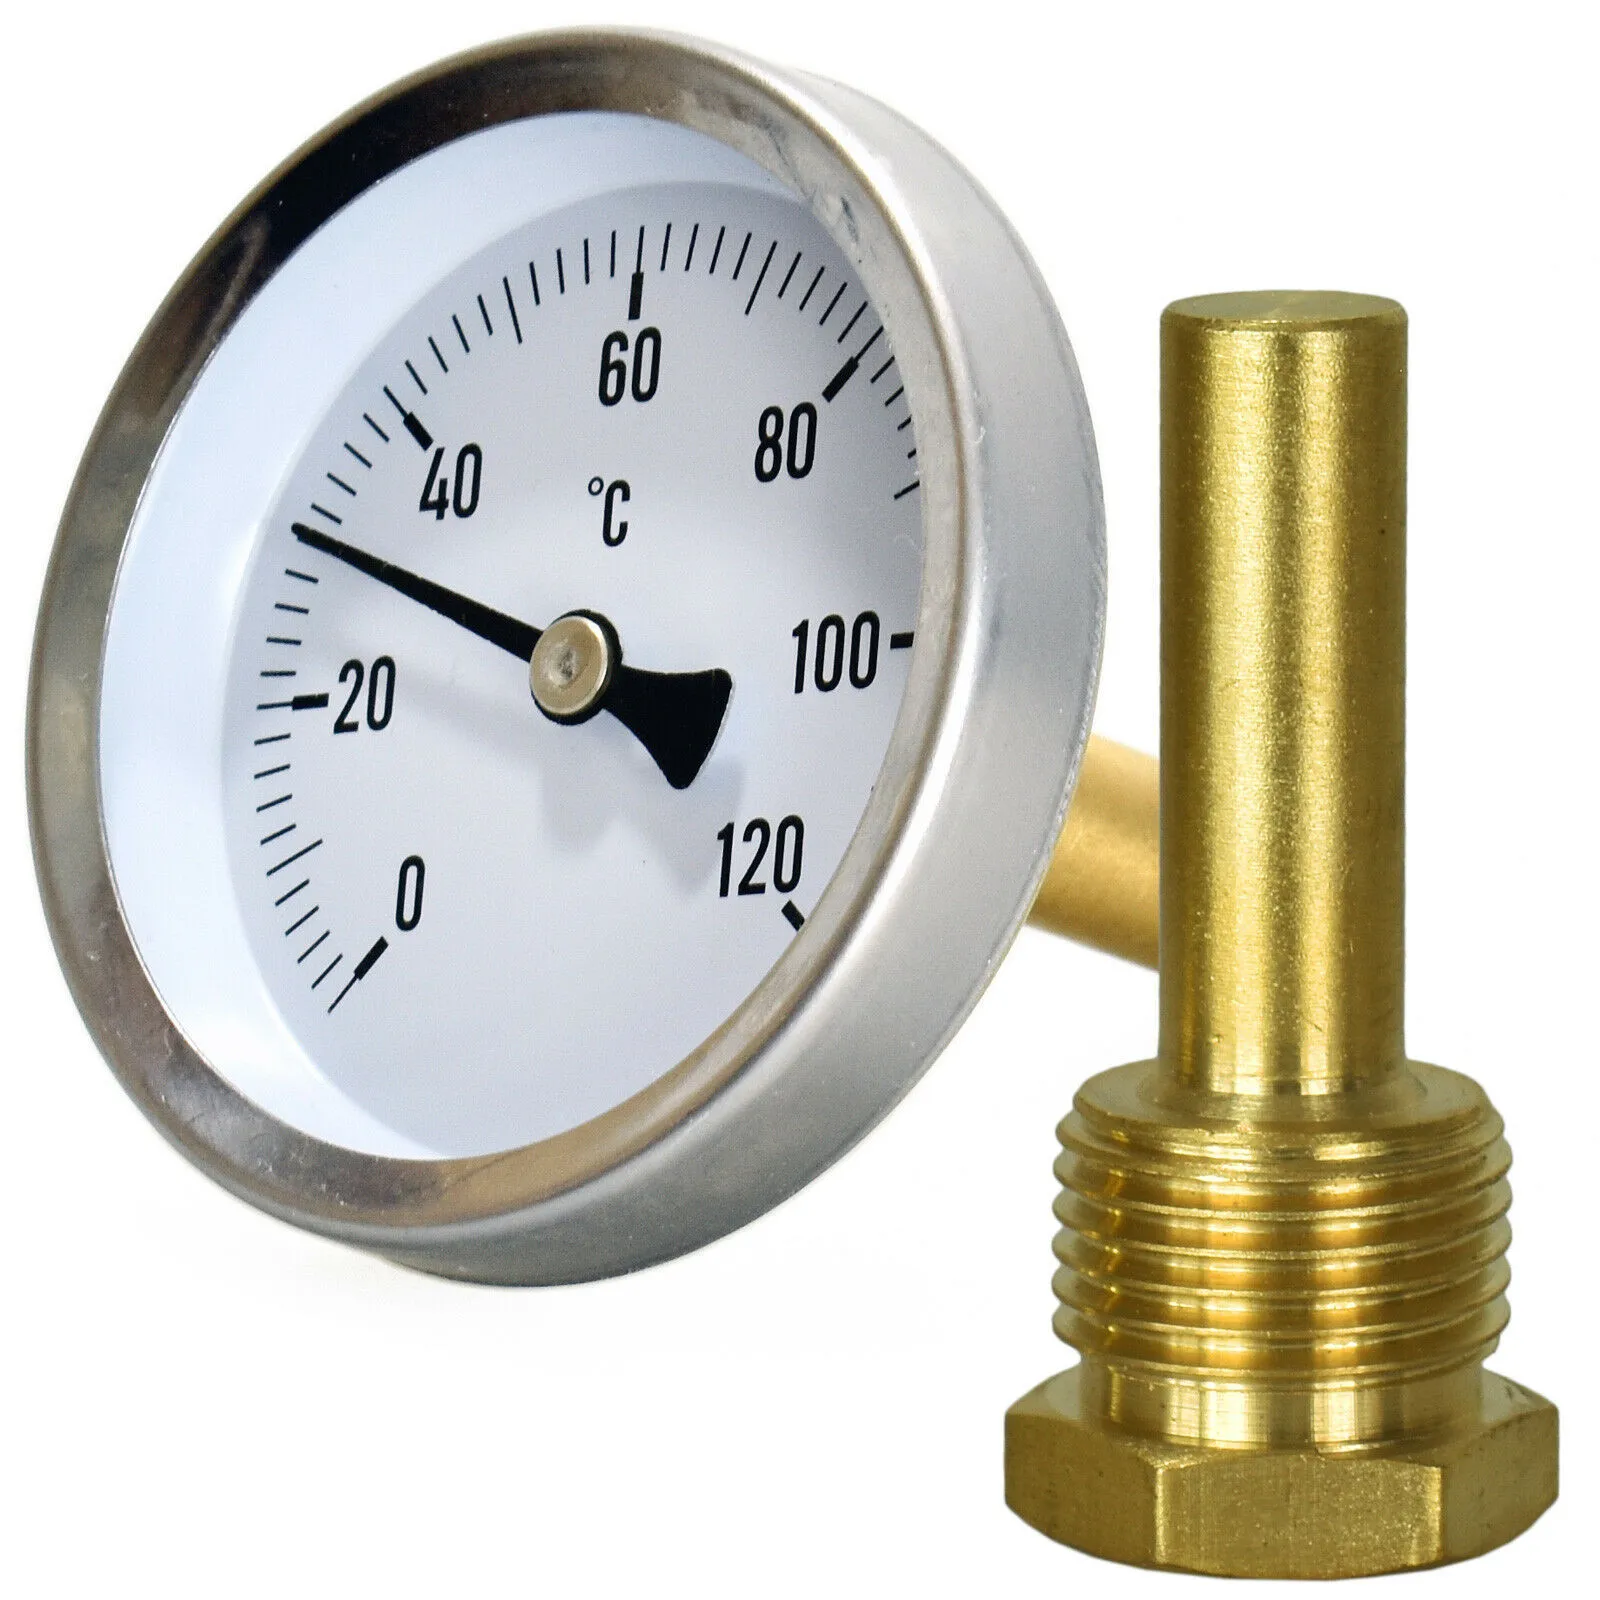 Metal Thermometer Hot Water Pipe Thermometer 0-120°C Heating 63mm Dial Temp For Hot Water Heating Tube Oil Tanks